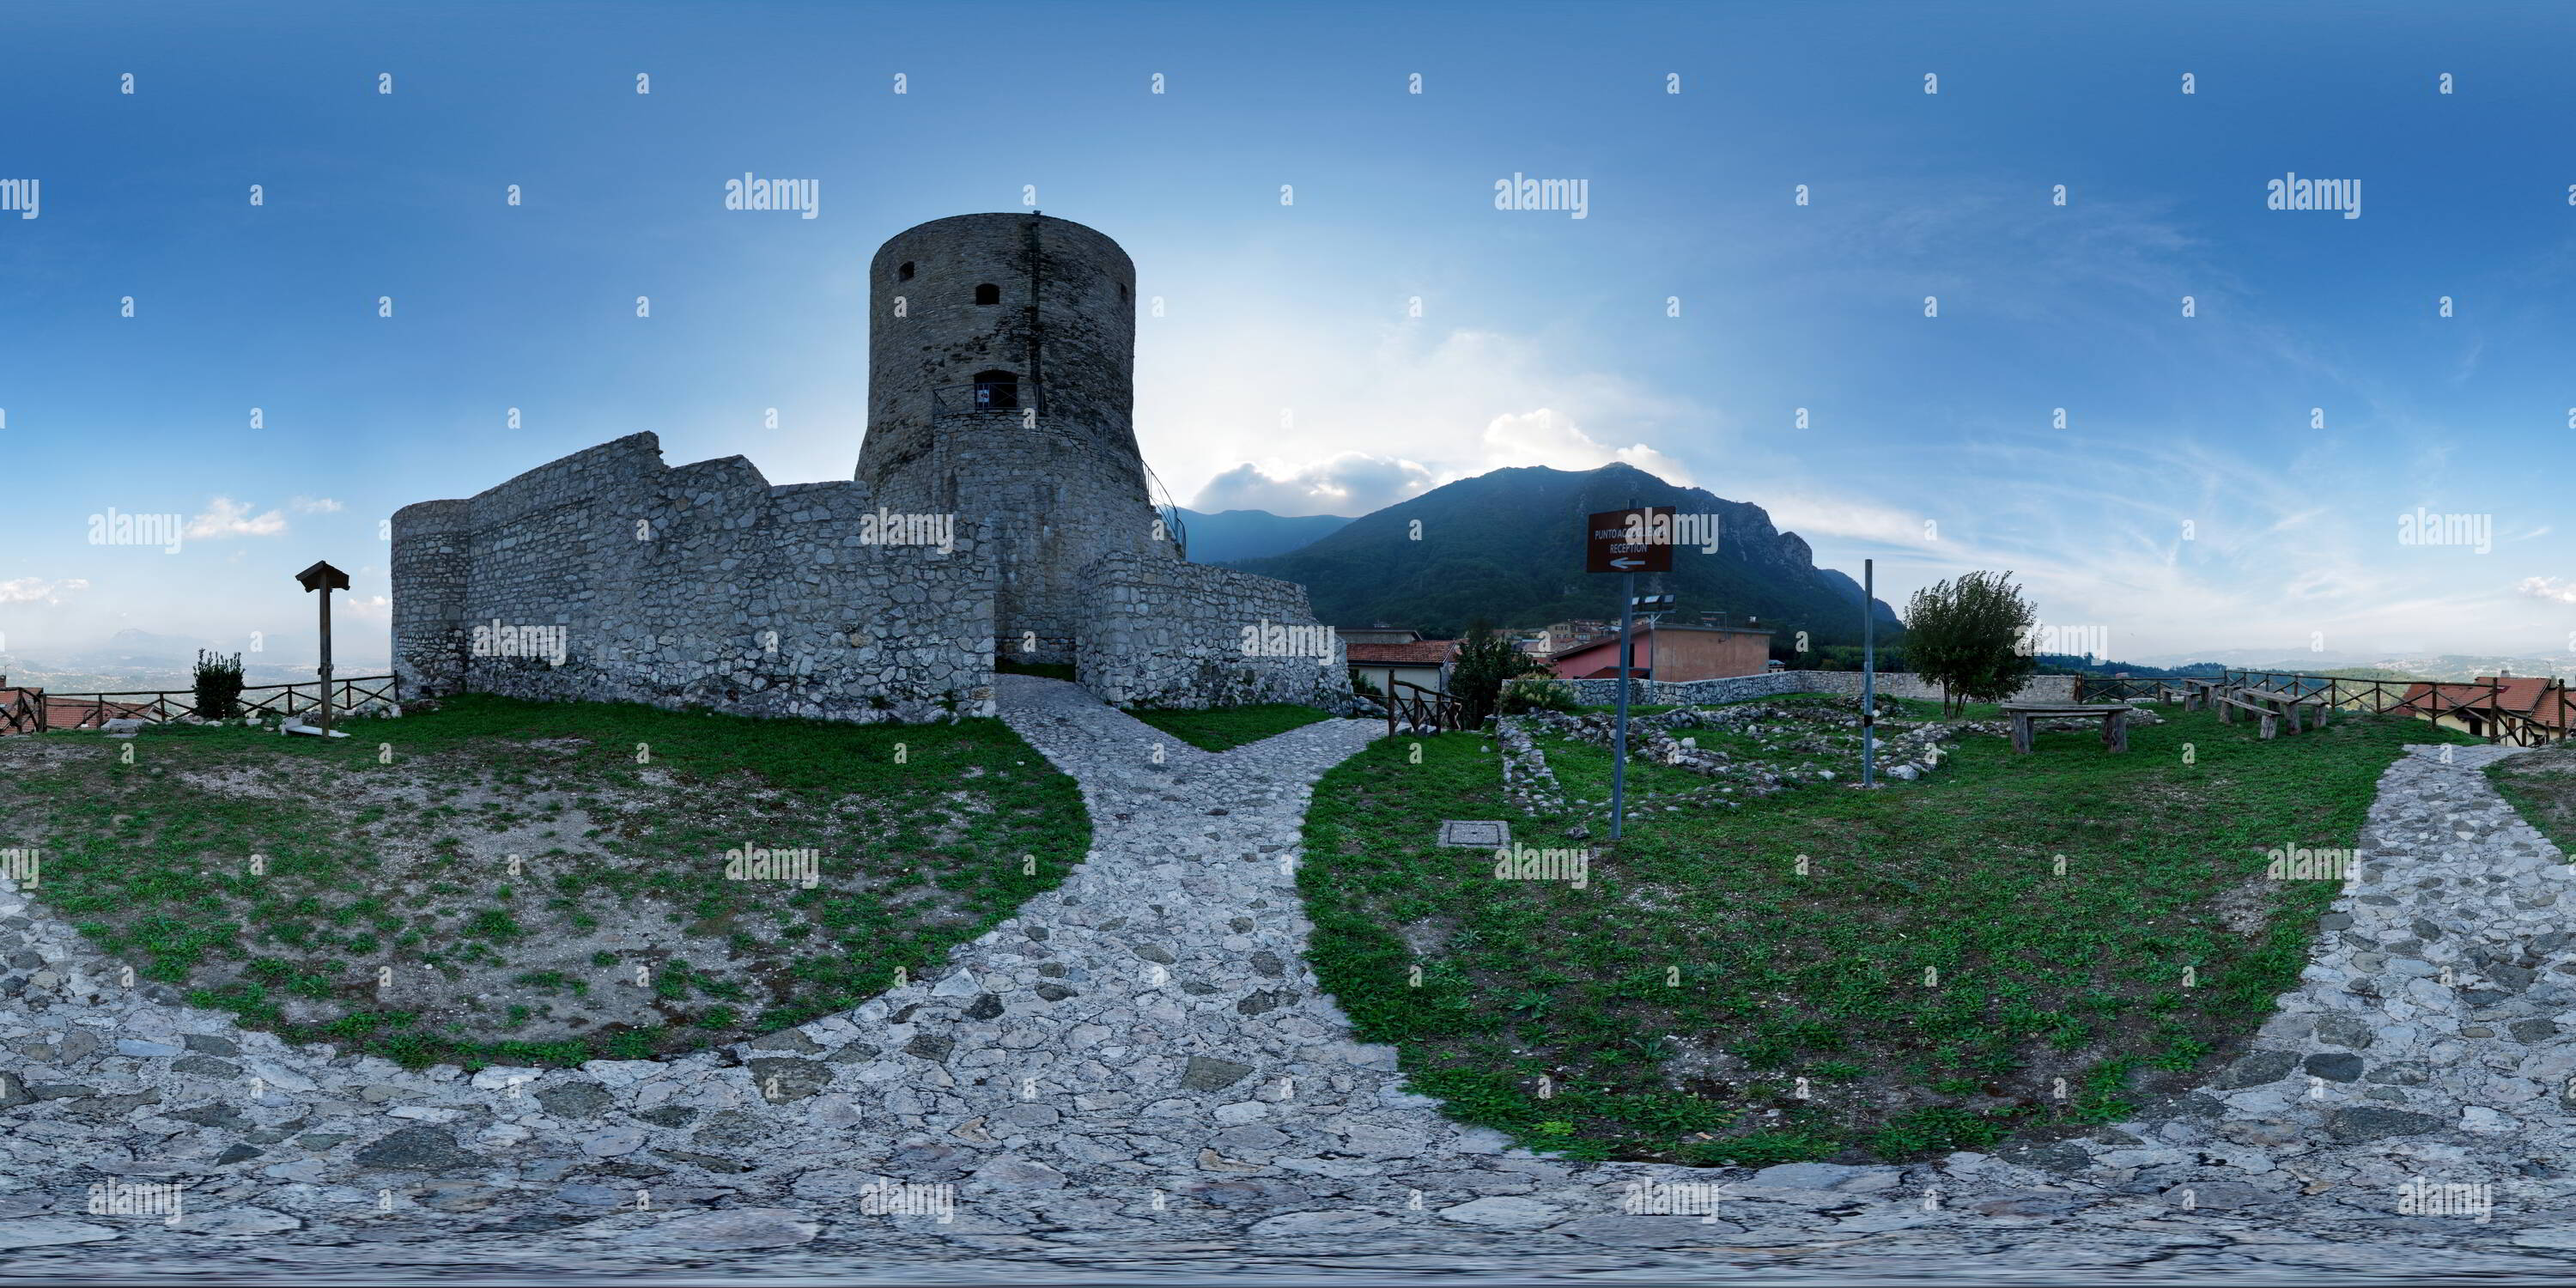 360 degree panoramic view of Torre Angioina at dusk, Summonte, Avellino province, Irpinia, September 2018